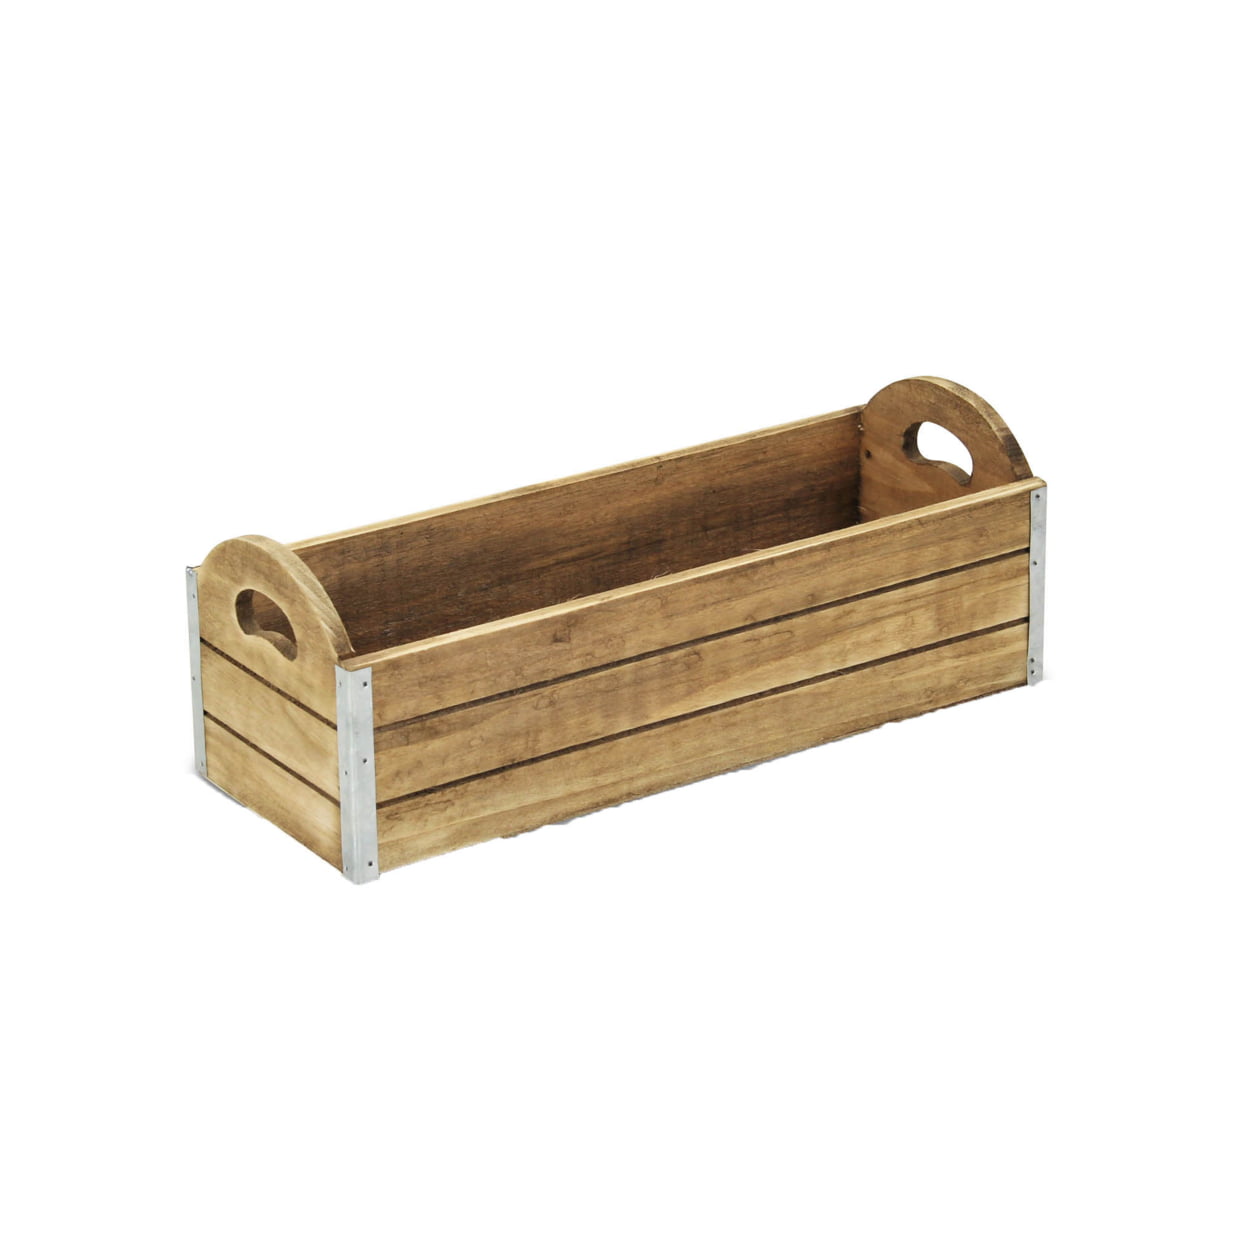 Picture of CheungsRattan 4744 Wooden Ledge Planter with Metal Border Accents